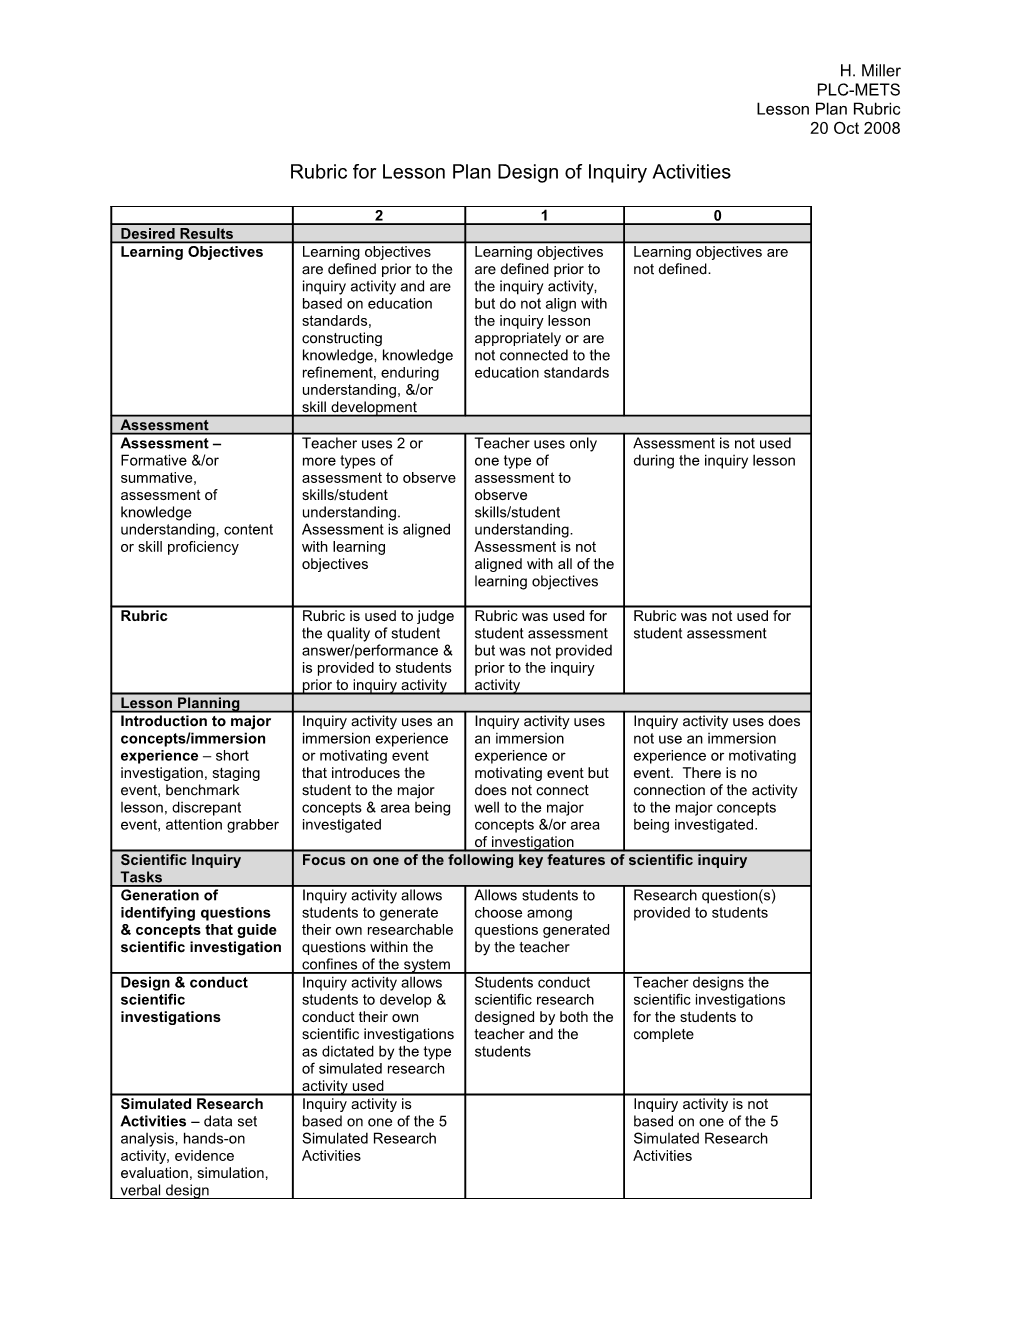 Rubric for Lesson Plan Design of Inquiry Activities